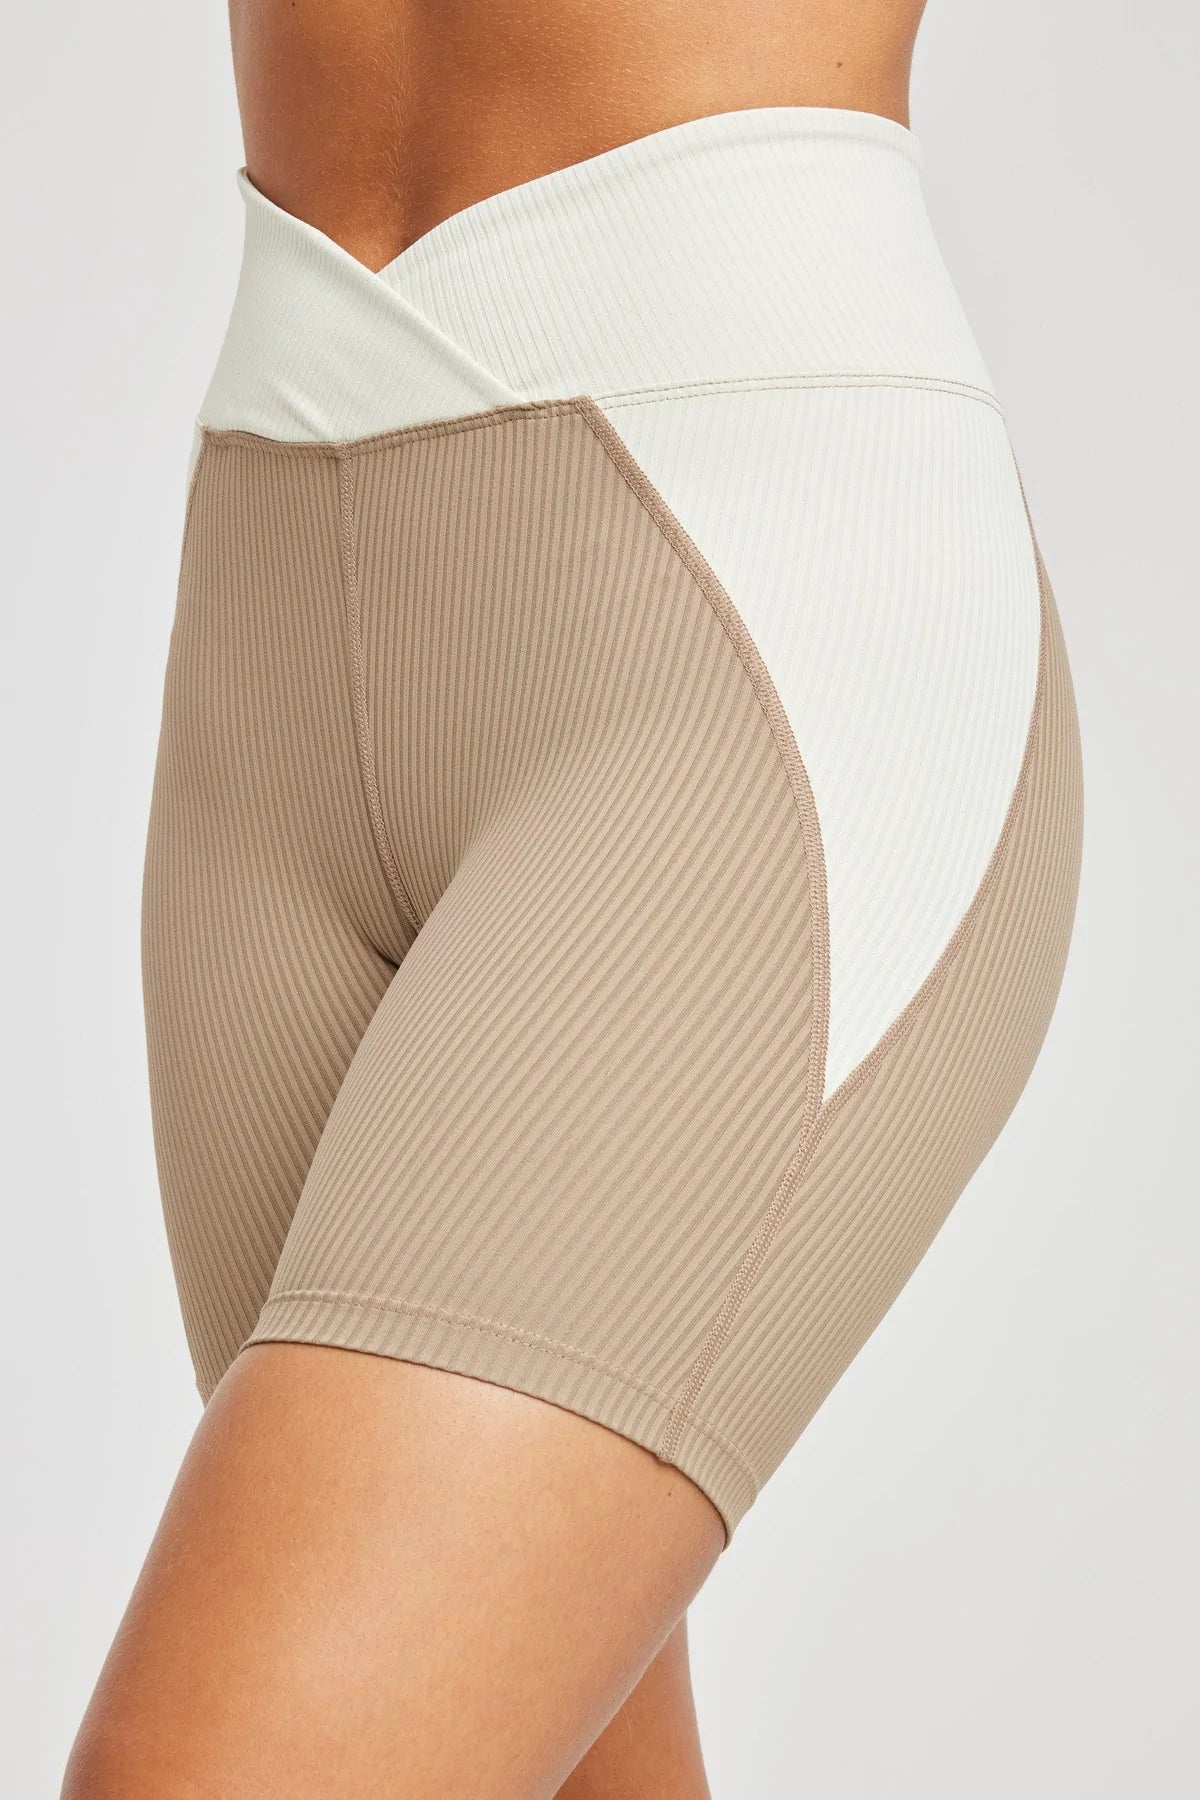 Year Of Ours Womens Ribbed Studio Biker Short